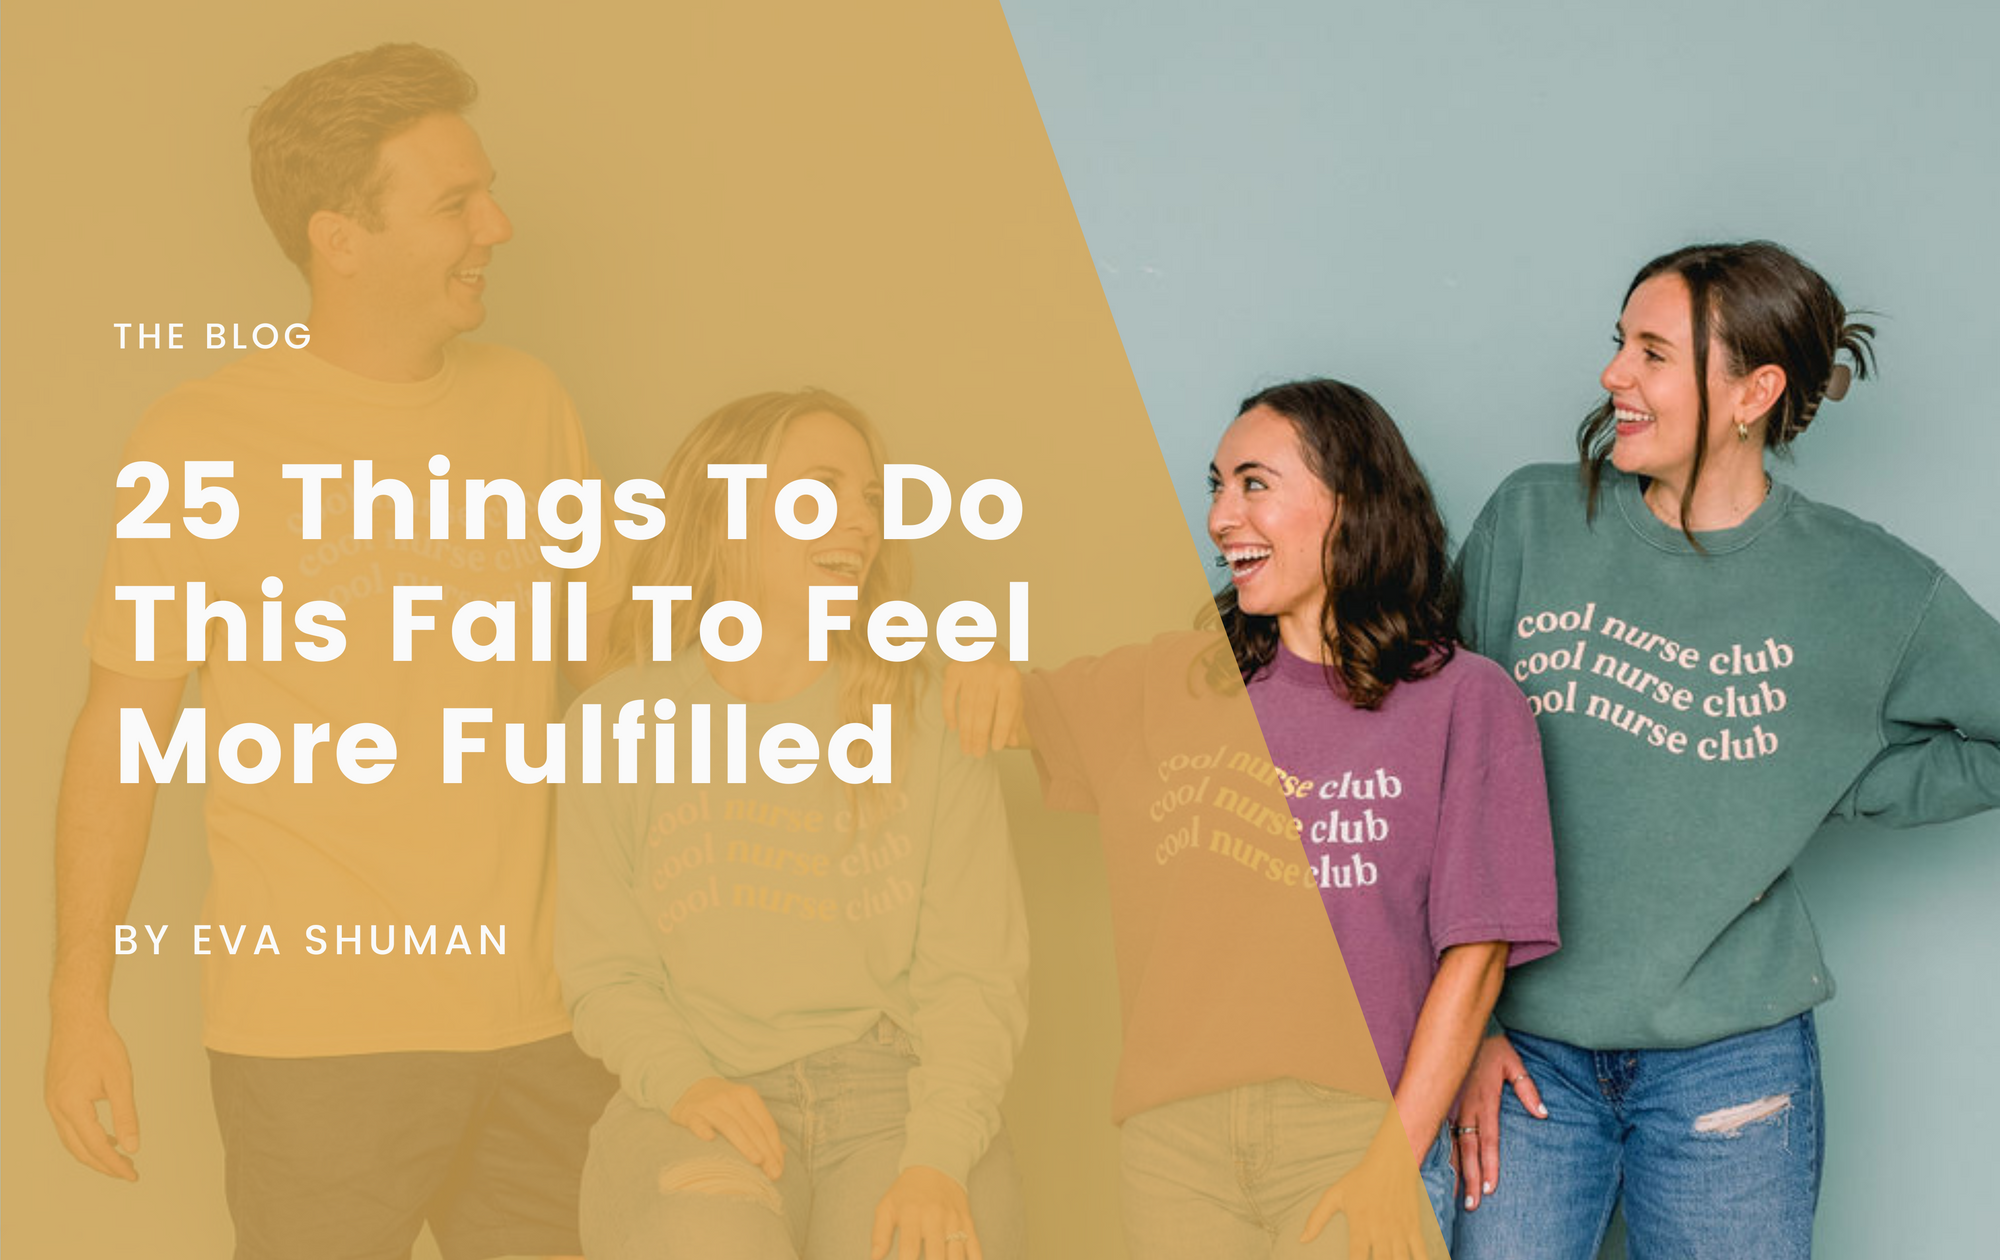 25 Things To Do This Fall To Feel More Fulfilled